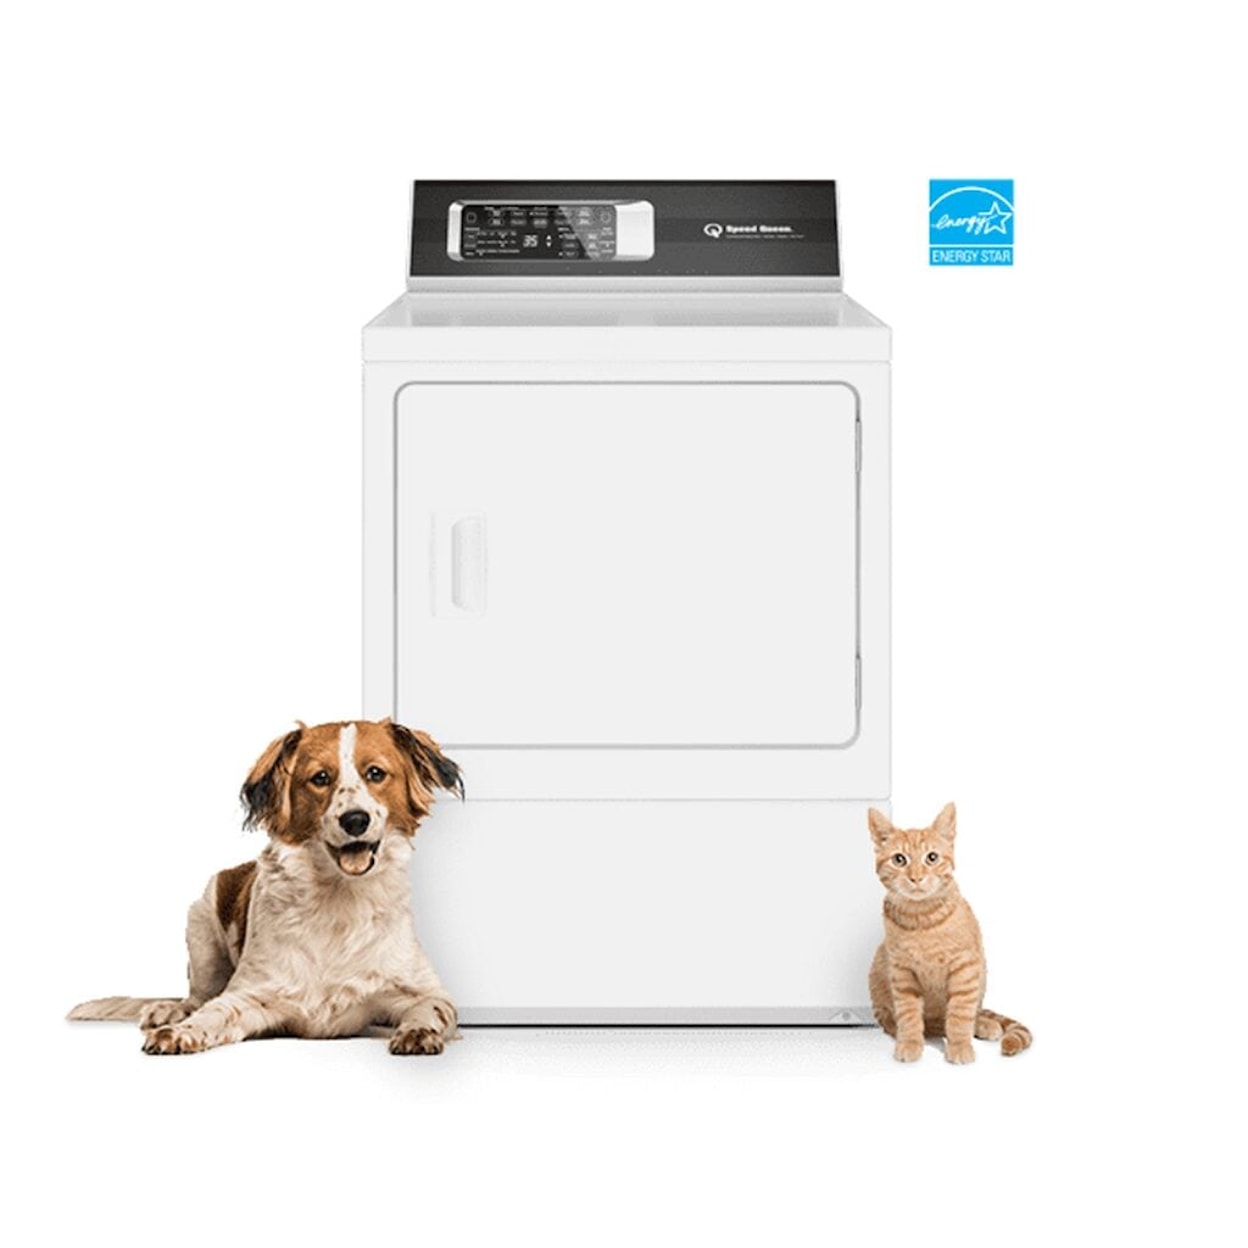 Speed Queen Laundry DR7 Sanitizing Electric Dryer with Pet Plus